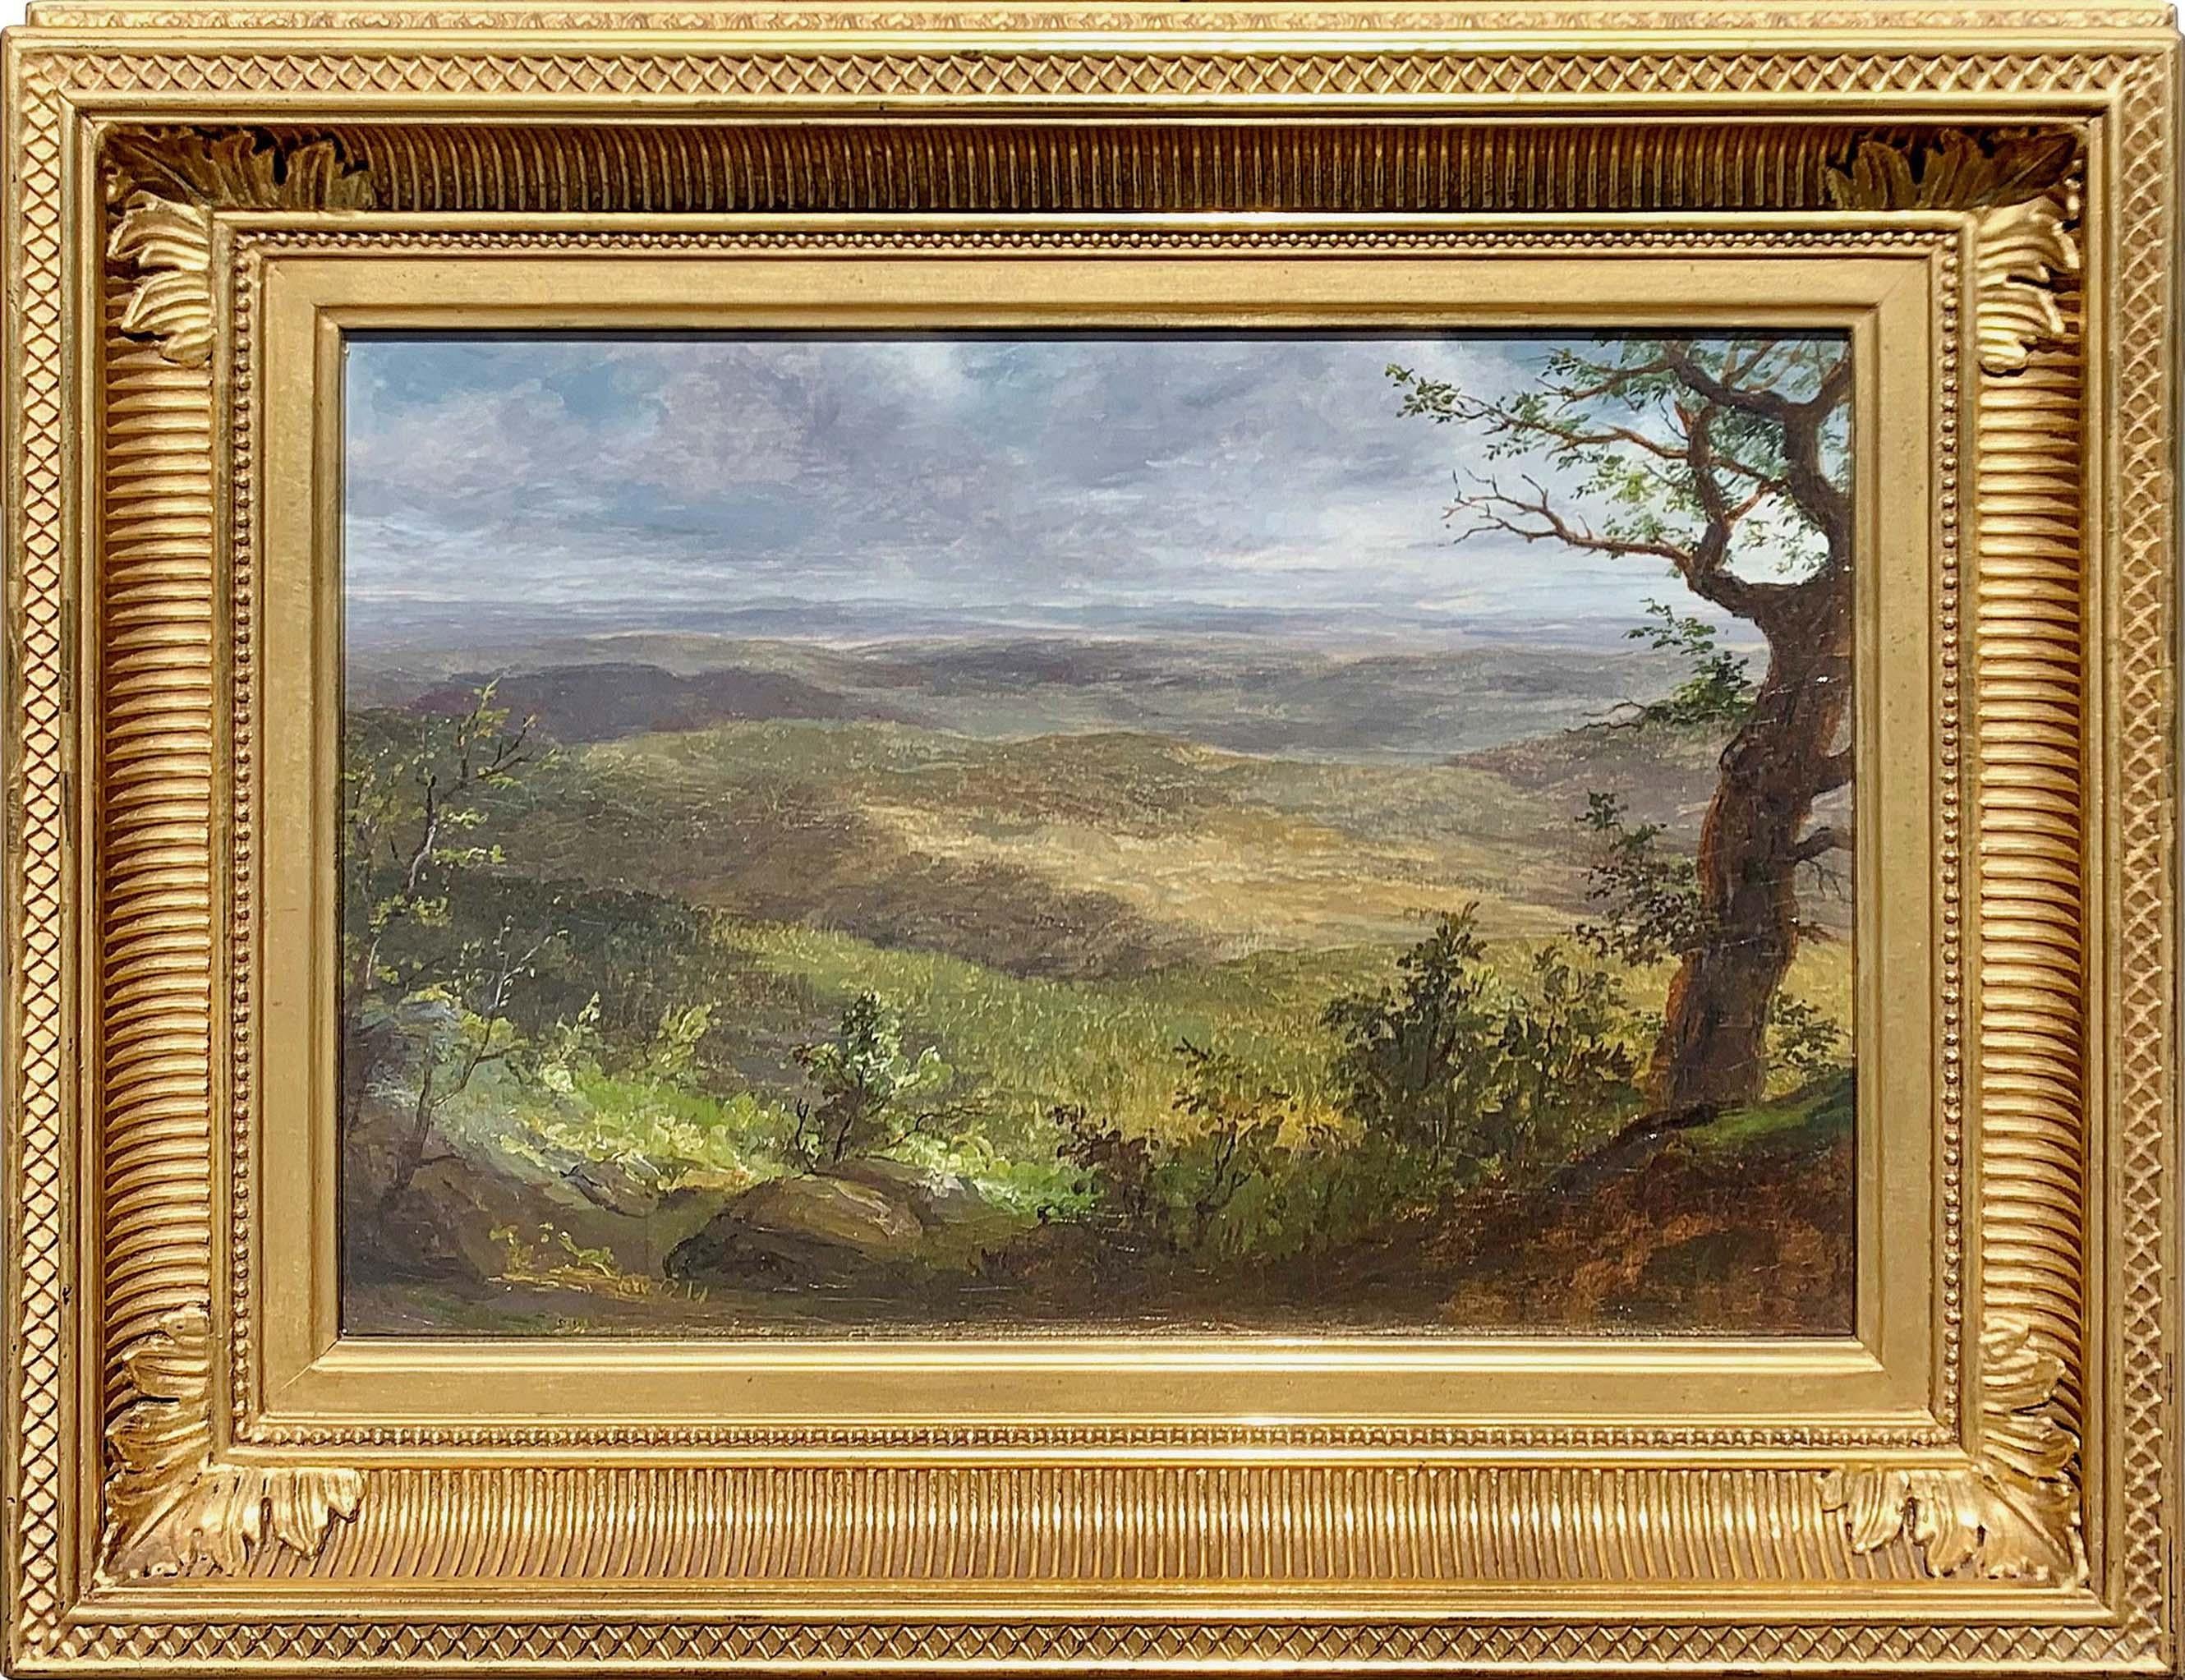 Shawangunk Mountains [View from top of Granit Road Looking Southeast] by Hudson River School artist Lemuel Maynard Wiles (1826-1905) is oil on canvas mounted to board and measures 10 x 15 inches. The painting is signed and inscribed with the